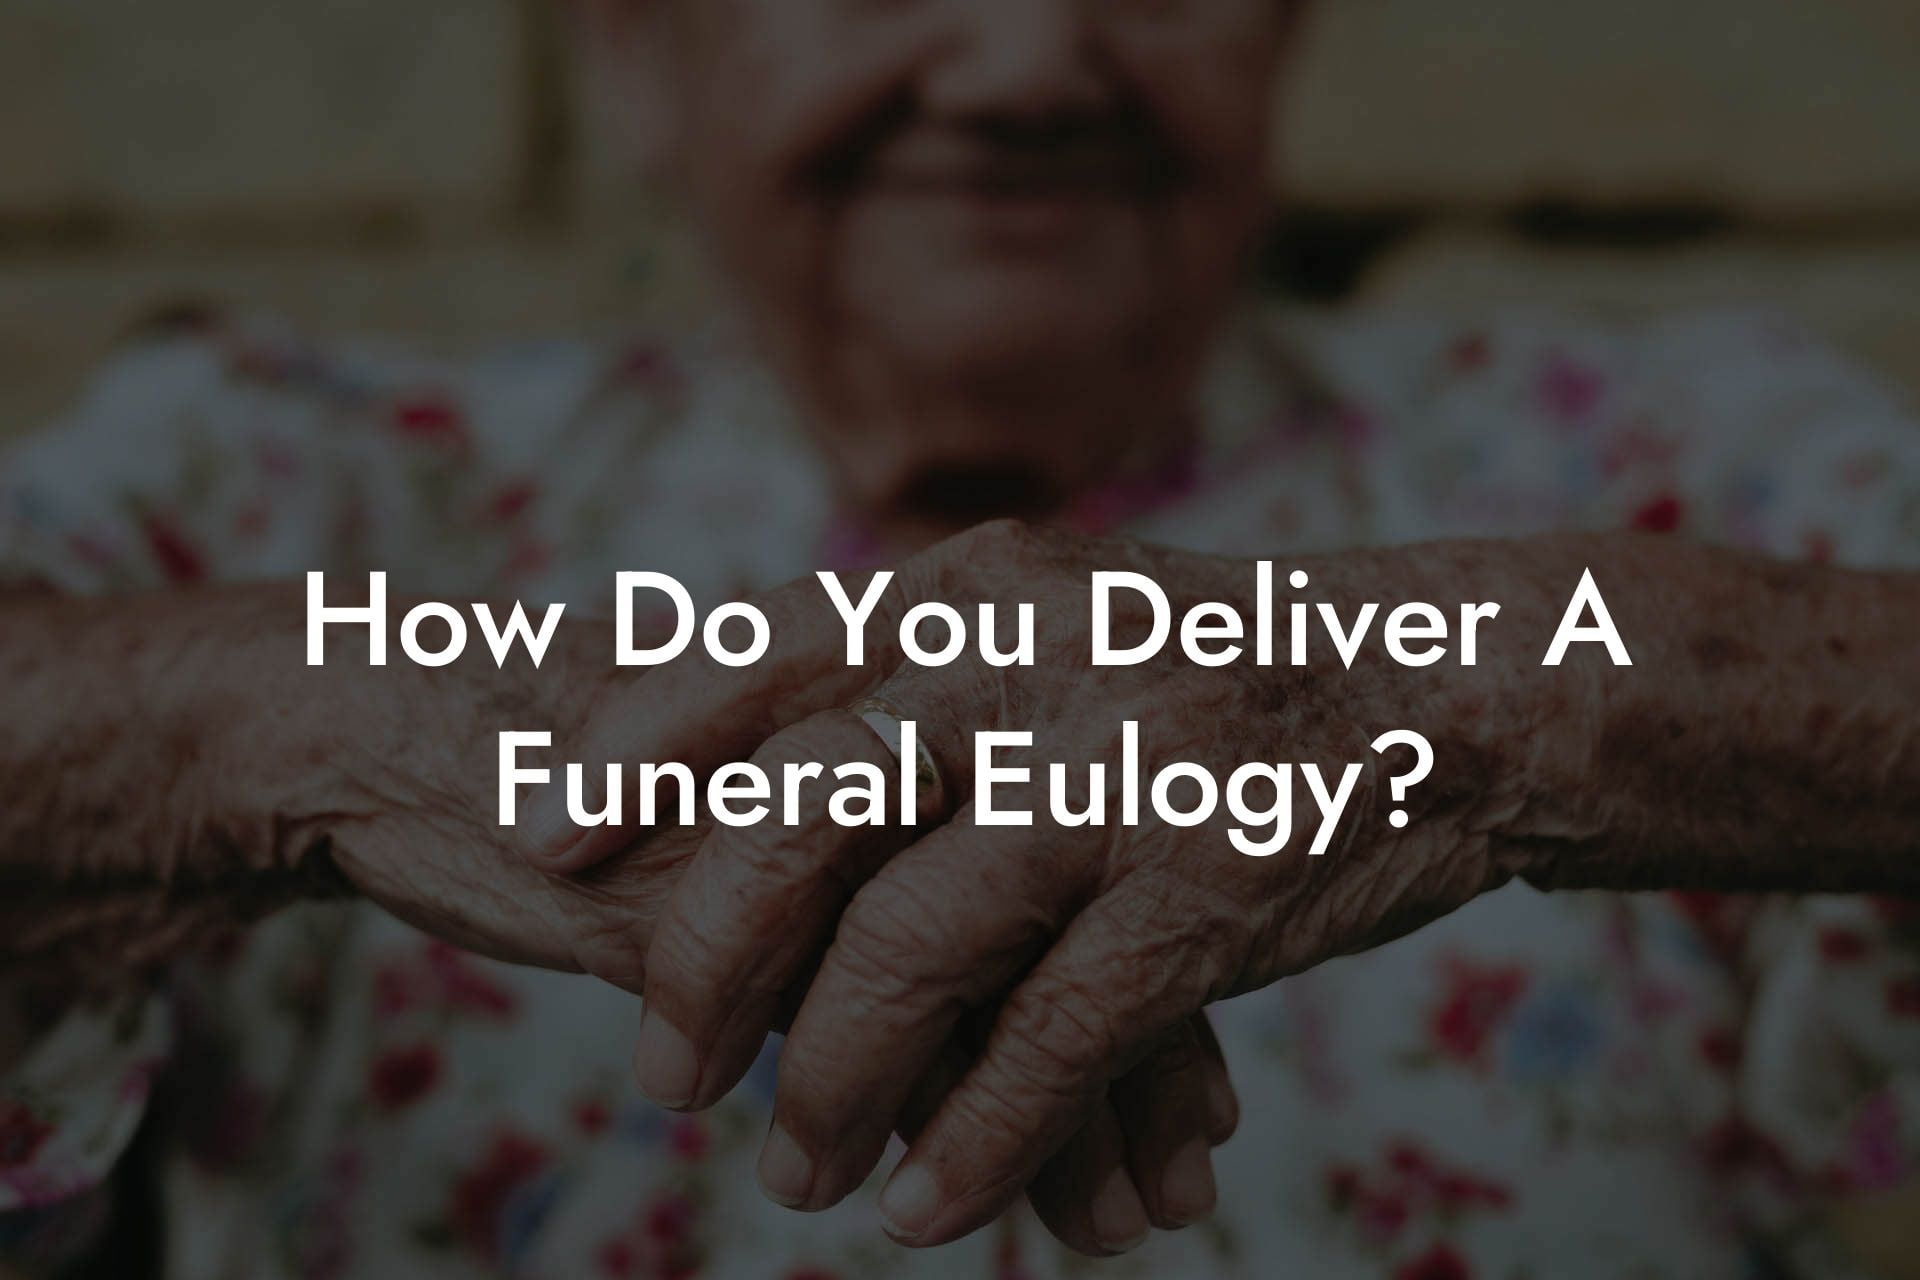 How Do You Deliver A Funeral Eulogy?